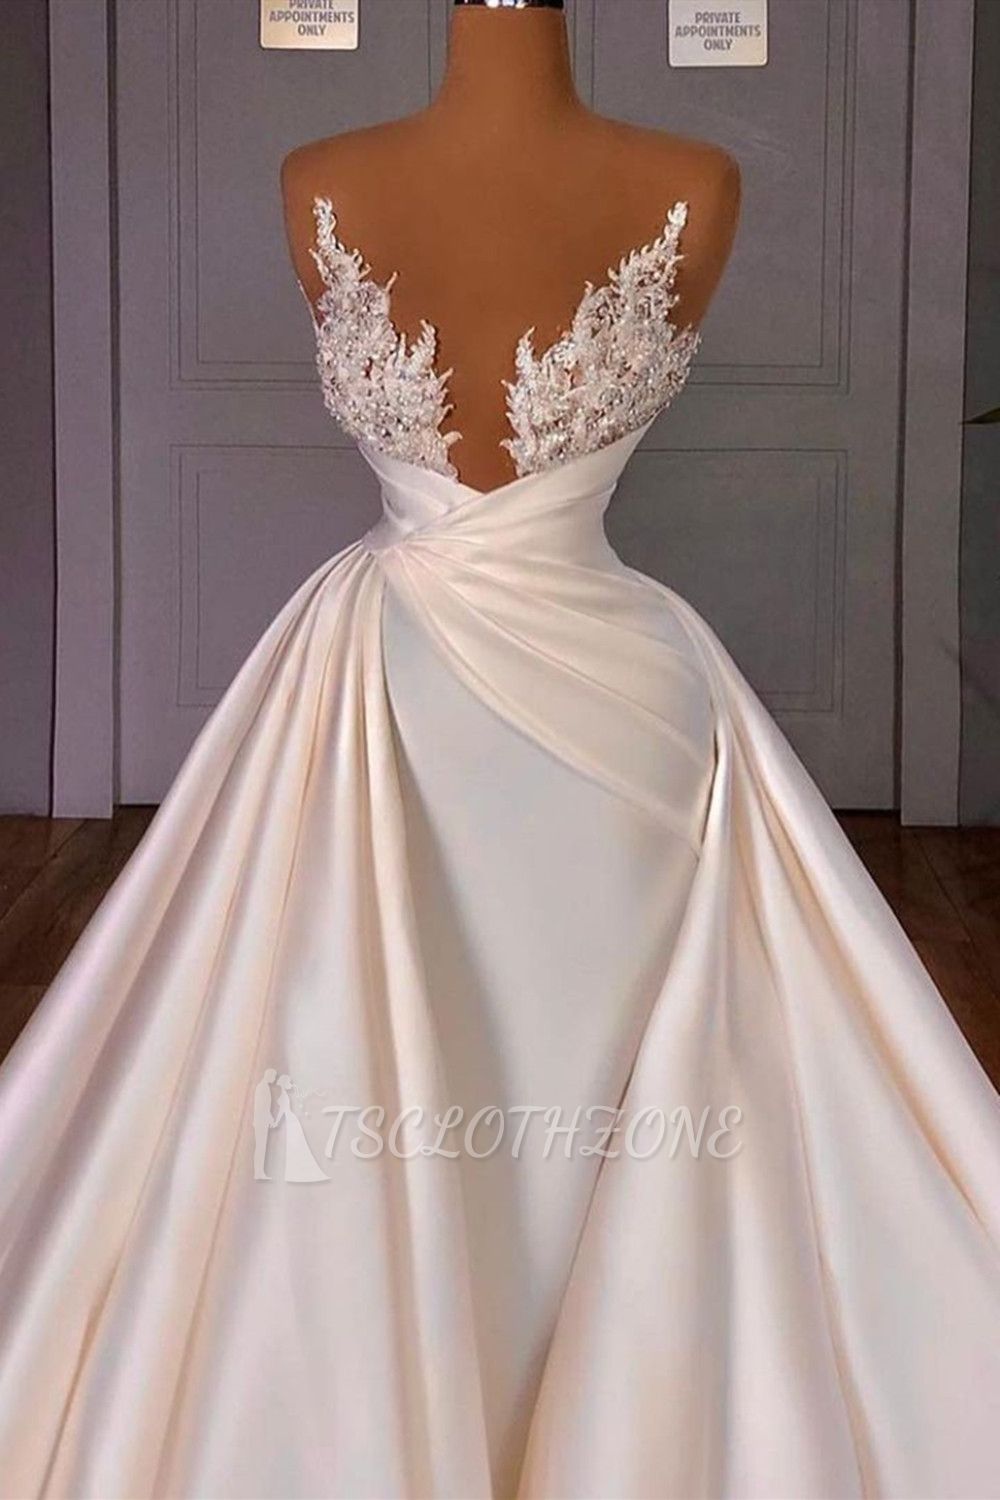 Off the Shoulder Sequined Fur Satin Wedding Party Gown Sleeveless/Long Sleeves styles